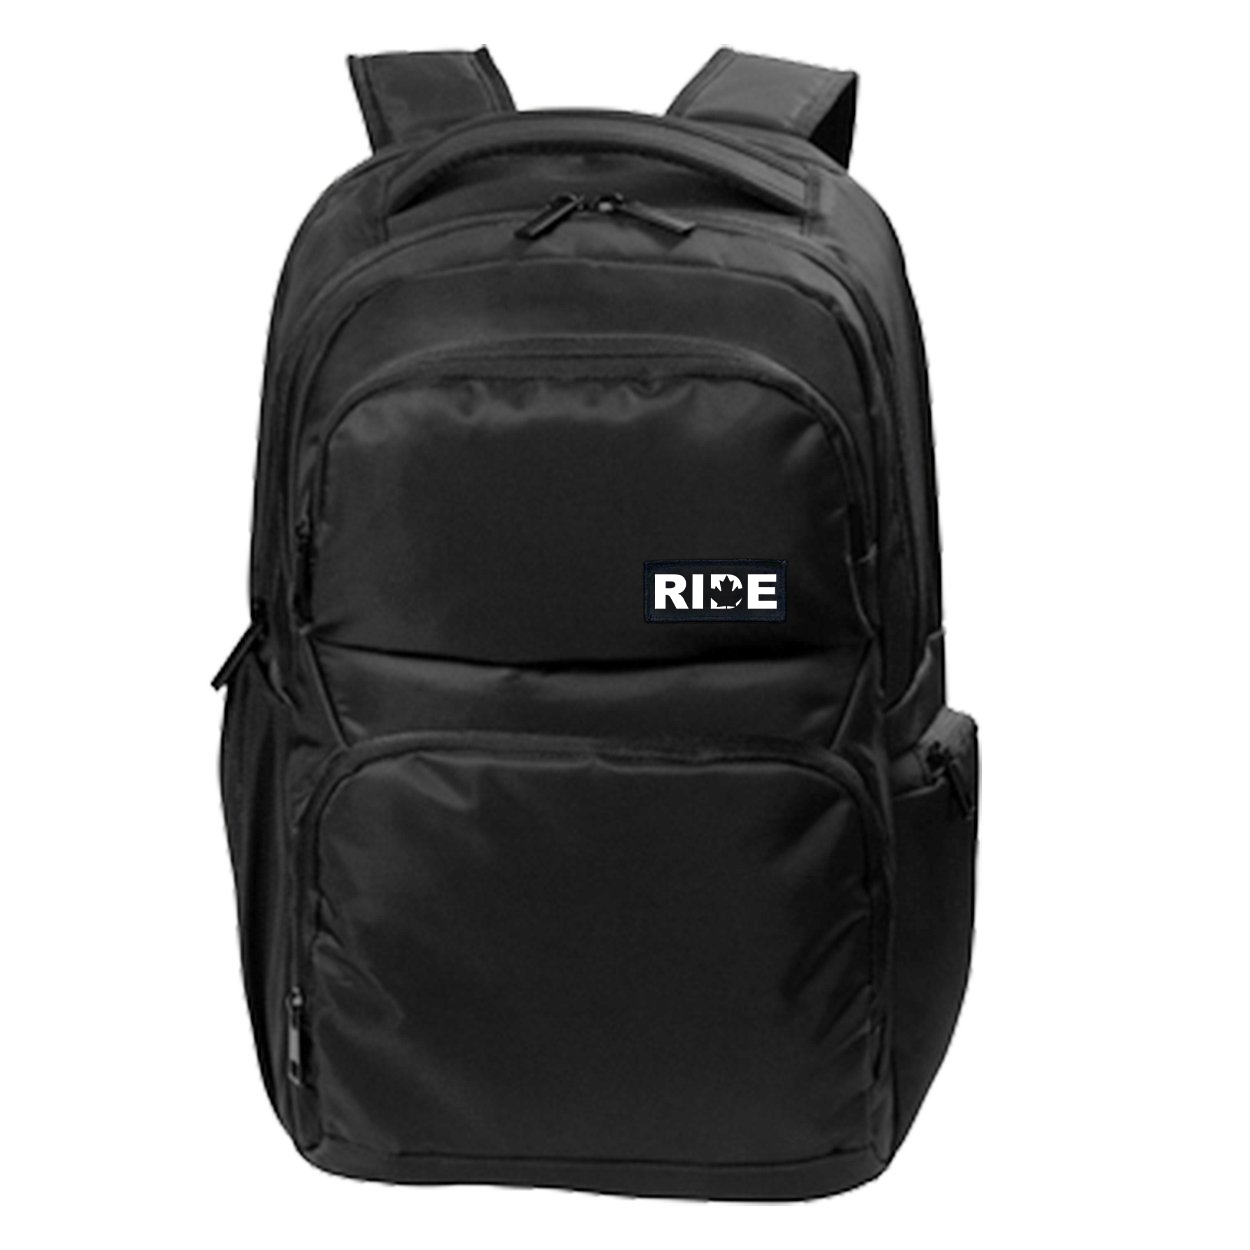 Ride Canada Night Out Woven Patch Transit Backpack Black (White Logo)